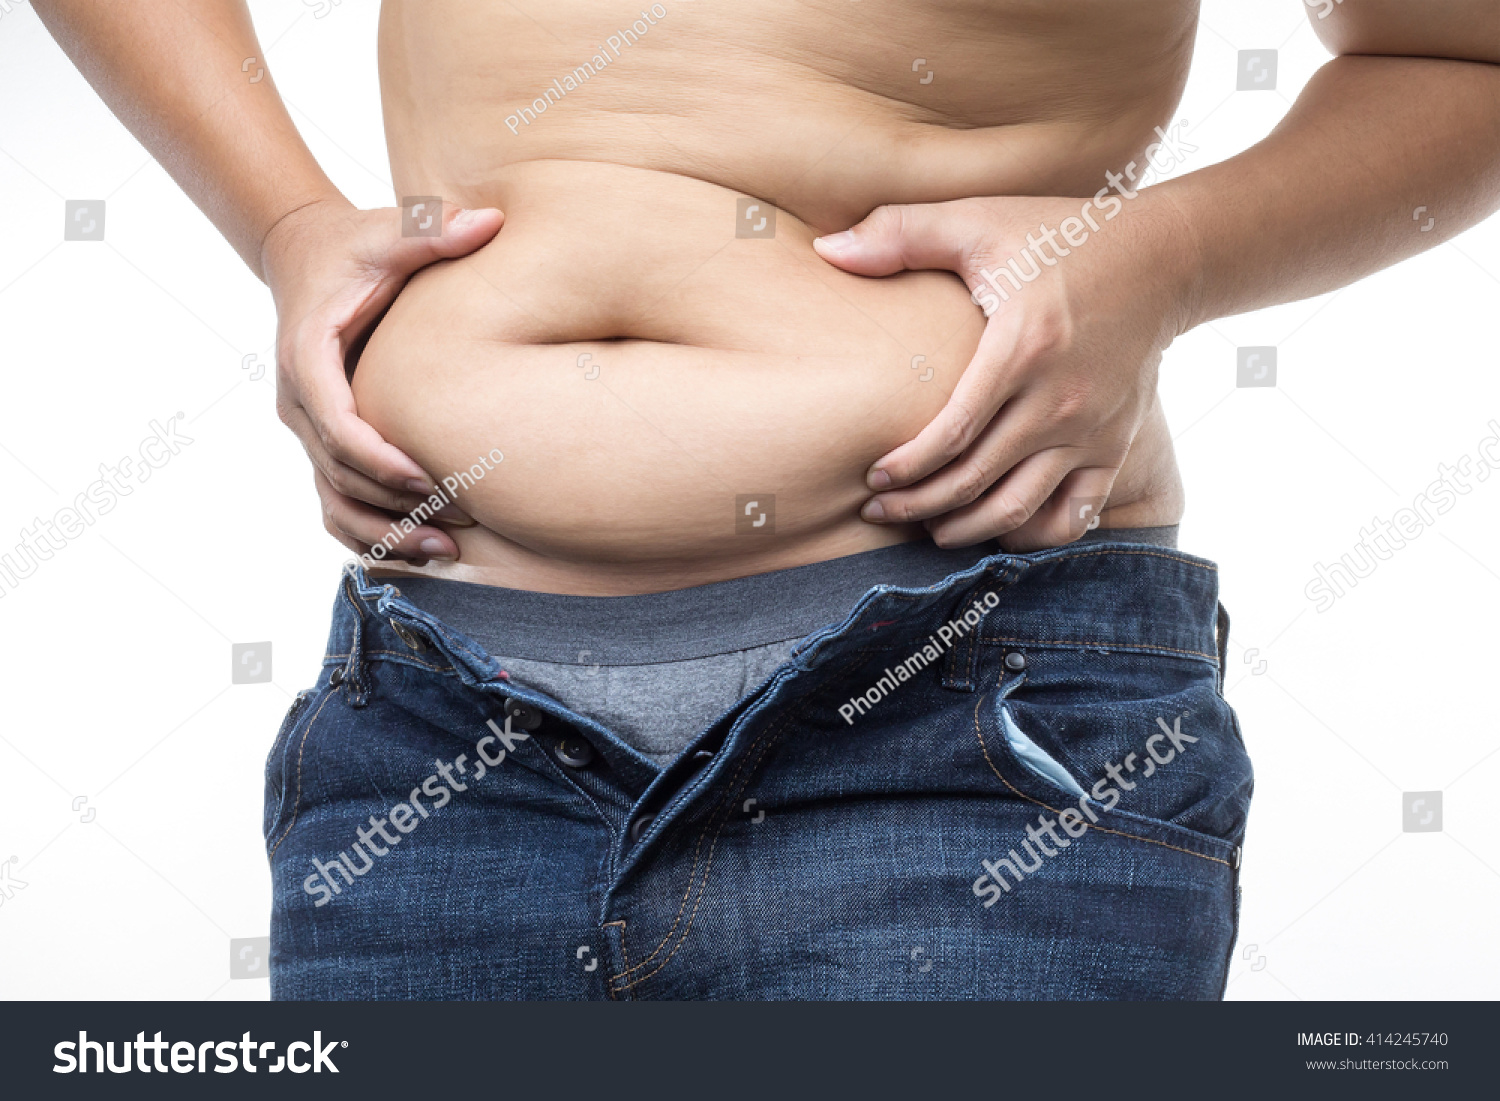 Fat Man Grabbing His Big Belly Stock Footage Video 1119085 